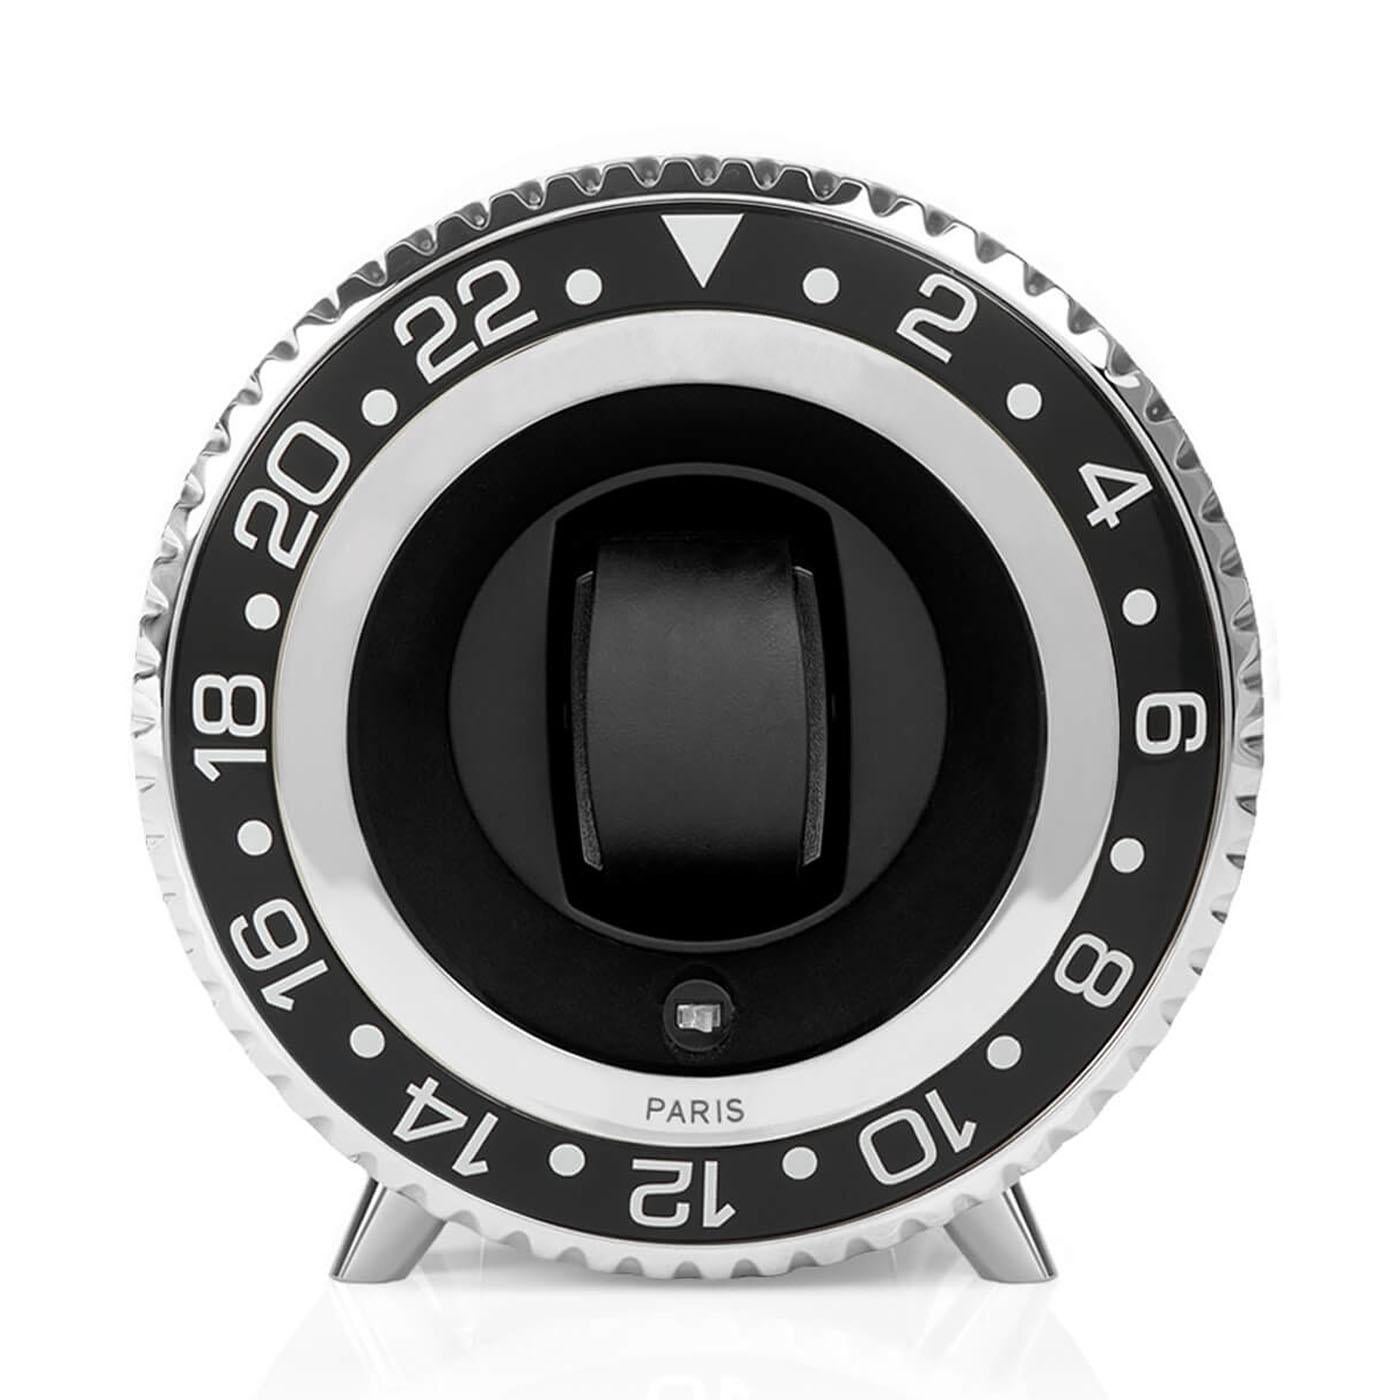 Watch winder black notched with bezel in blackened aluminium, structure
in aluminium in nickel finish. Rotating small case for automatic watches
covered with notched blackened aluminium in nickel finish. Integrated
watch winder with a cycle of